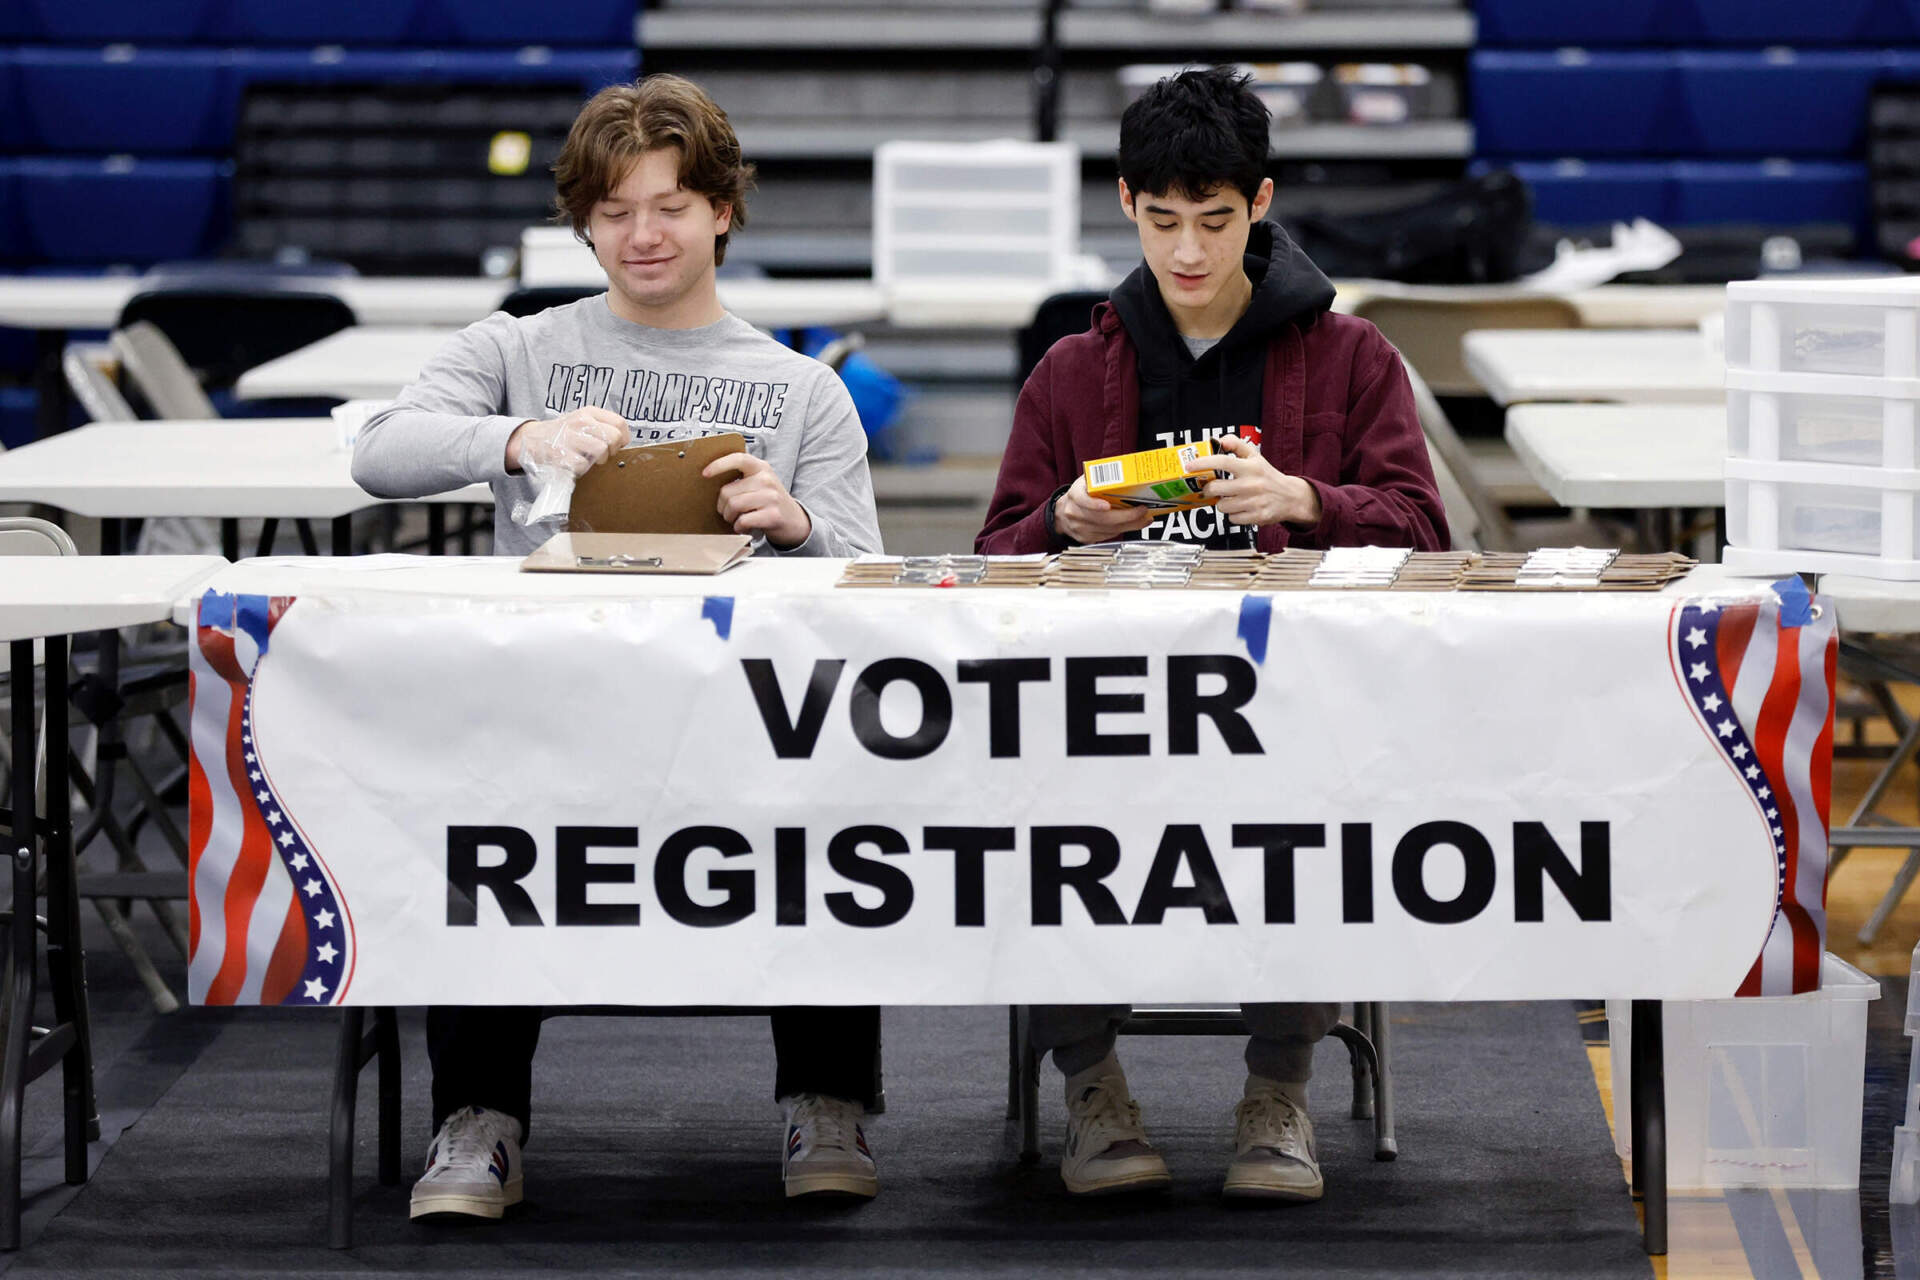 High school students Sawyer Brockman, left, and Jack Skilling volunteer at the voter registration table for the presidential primary election at Windham High School. (Michael Dwyer/AP)